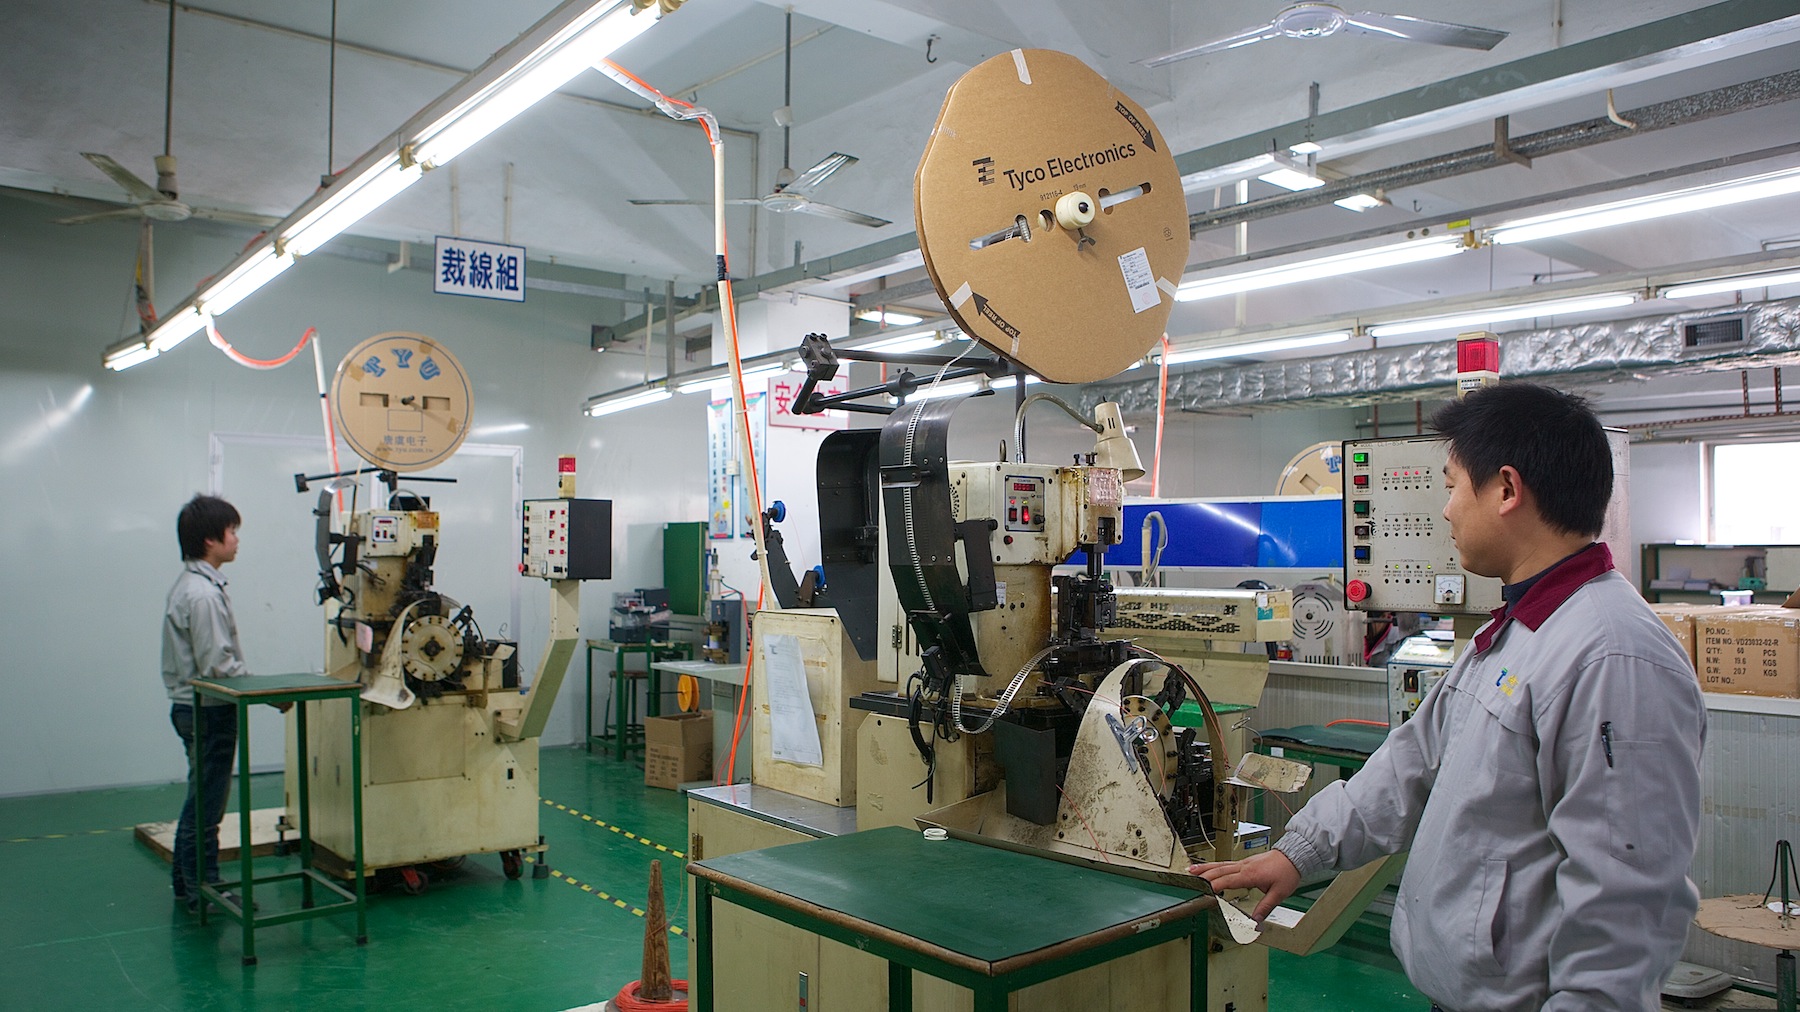 Cable Assembly Manufacturing Facility